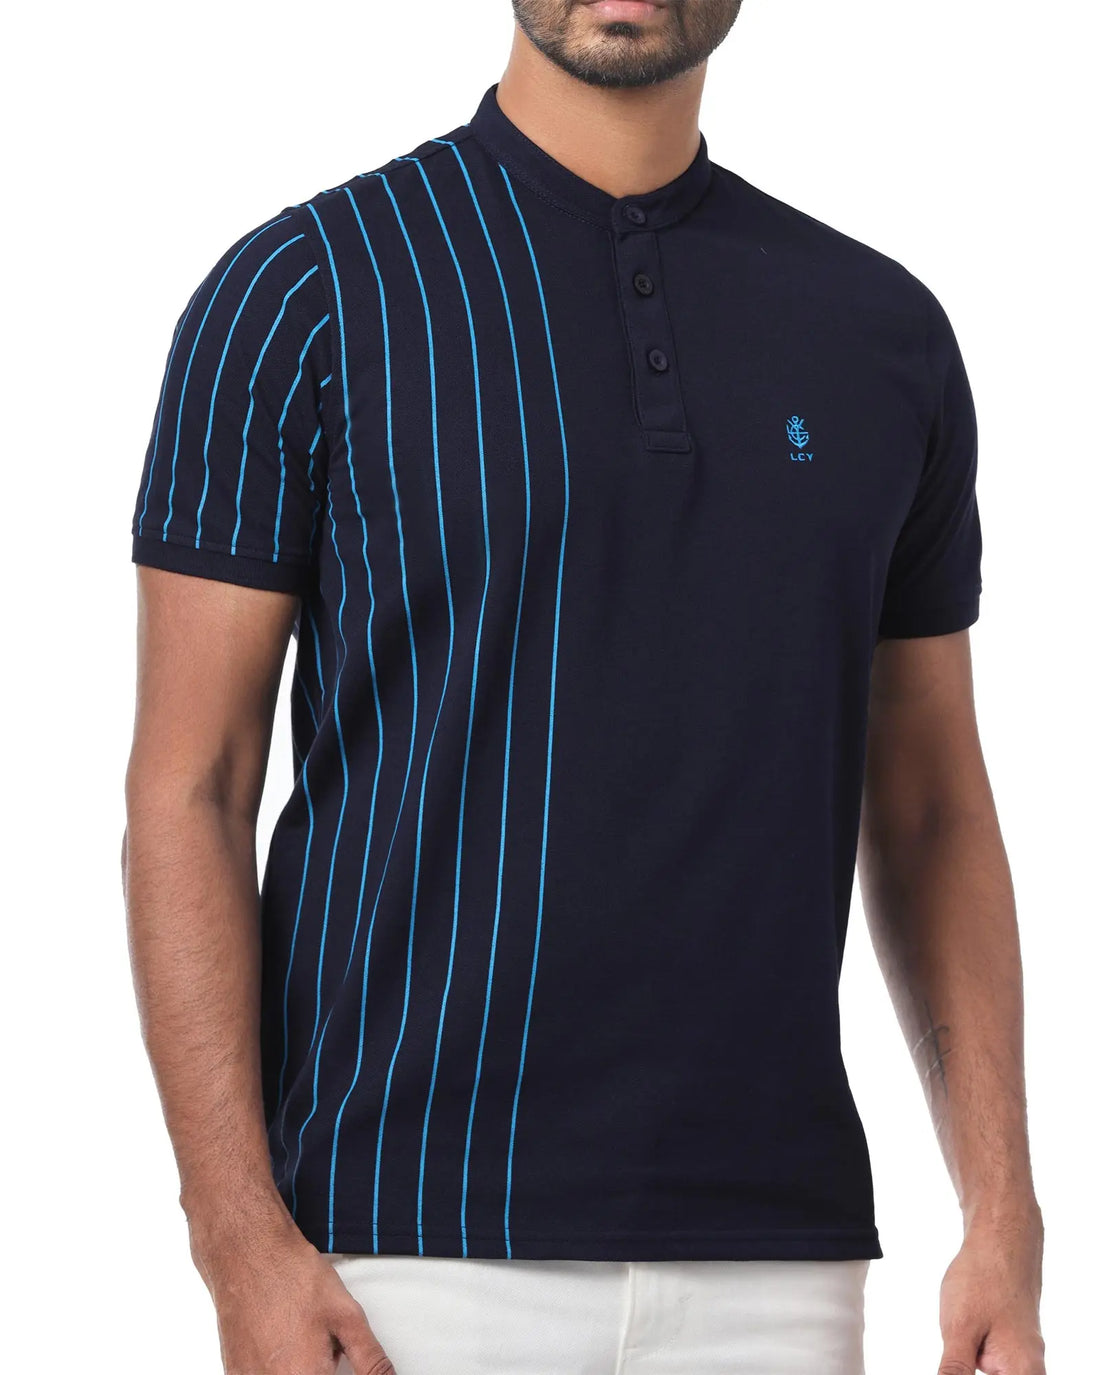 LCY London | Capsule Collection - Contrasting Vertical Striped Men's Mandarin Polo LCY London